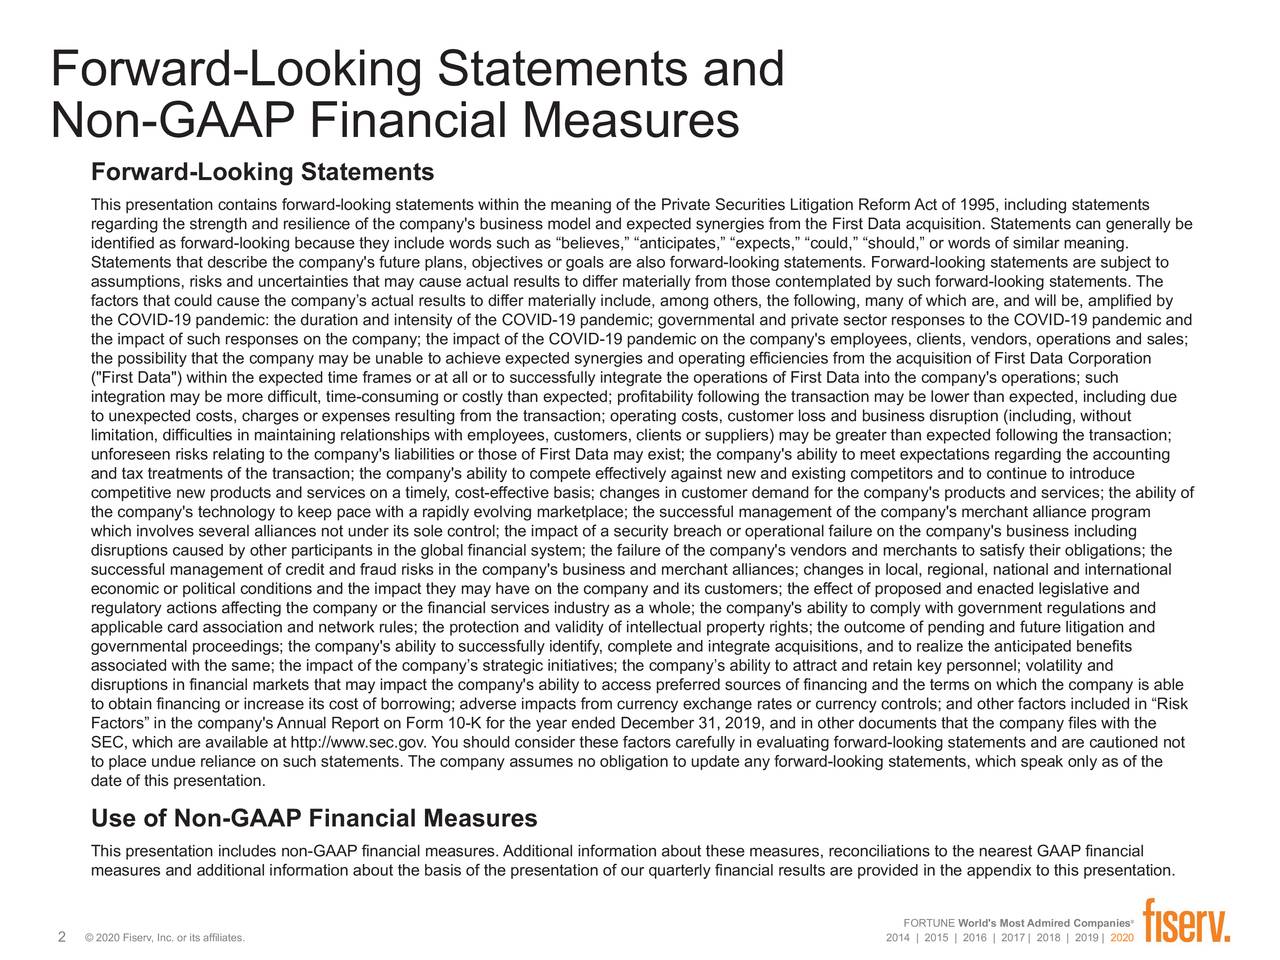 Forward-Looking Statements and